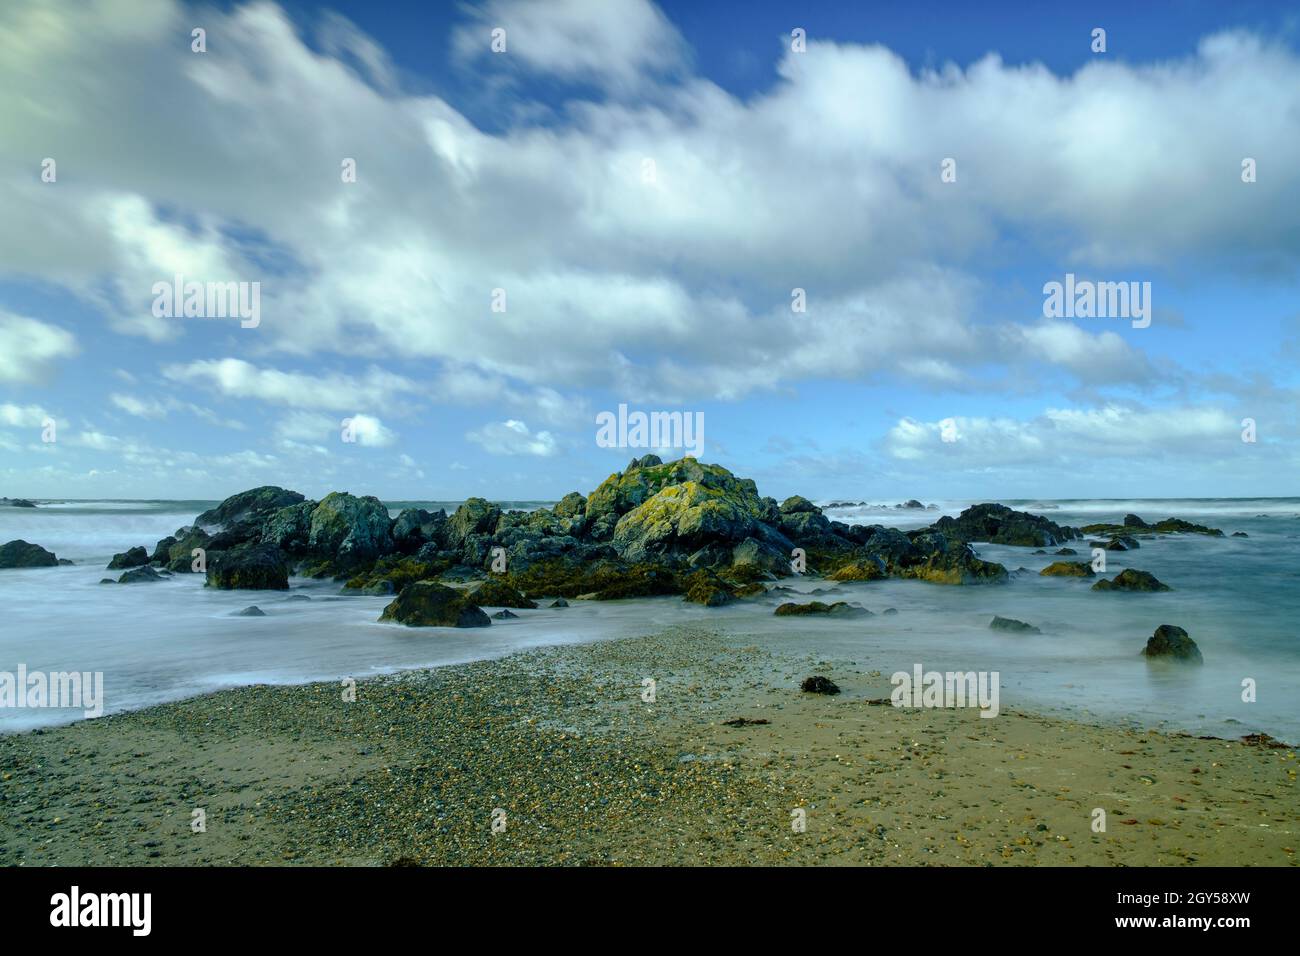 The retreating tide at Rhosneigr beach on Anglesey, North Wales, UK Stock Photo